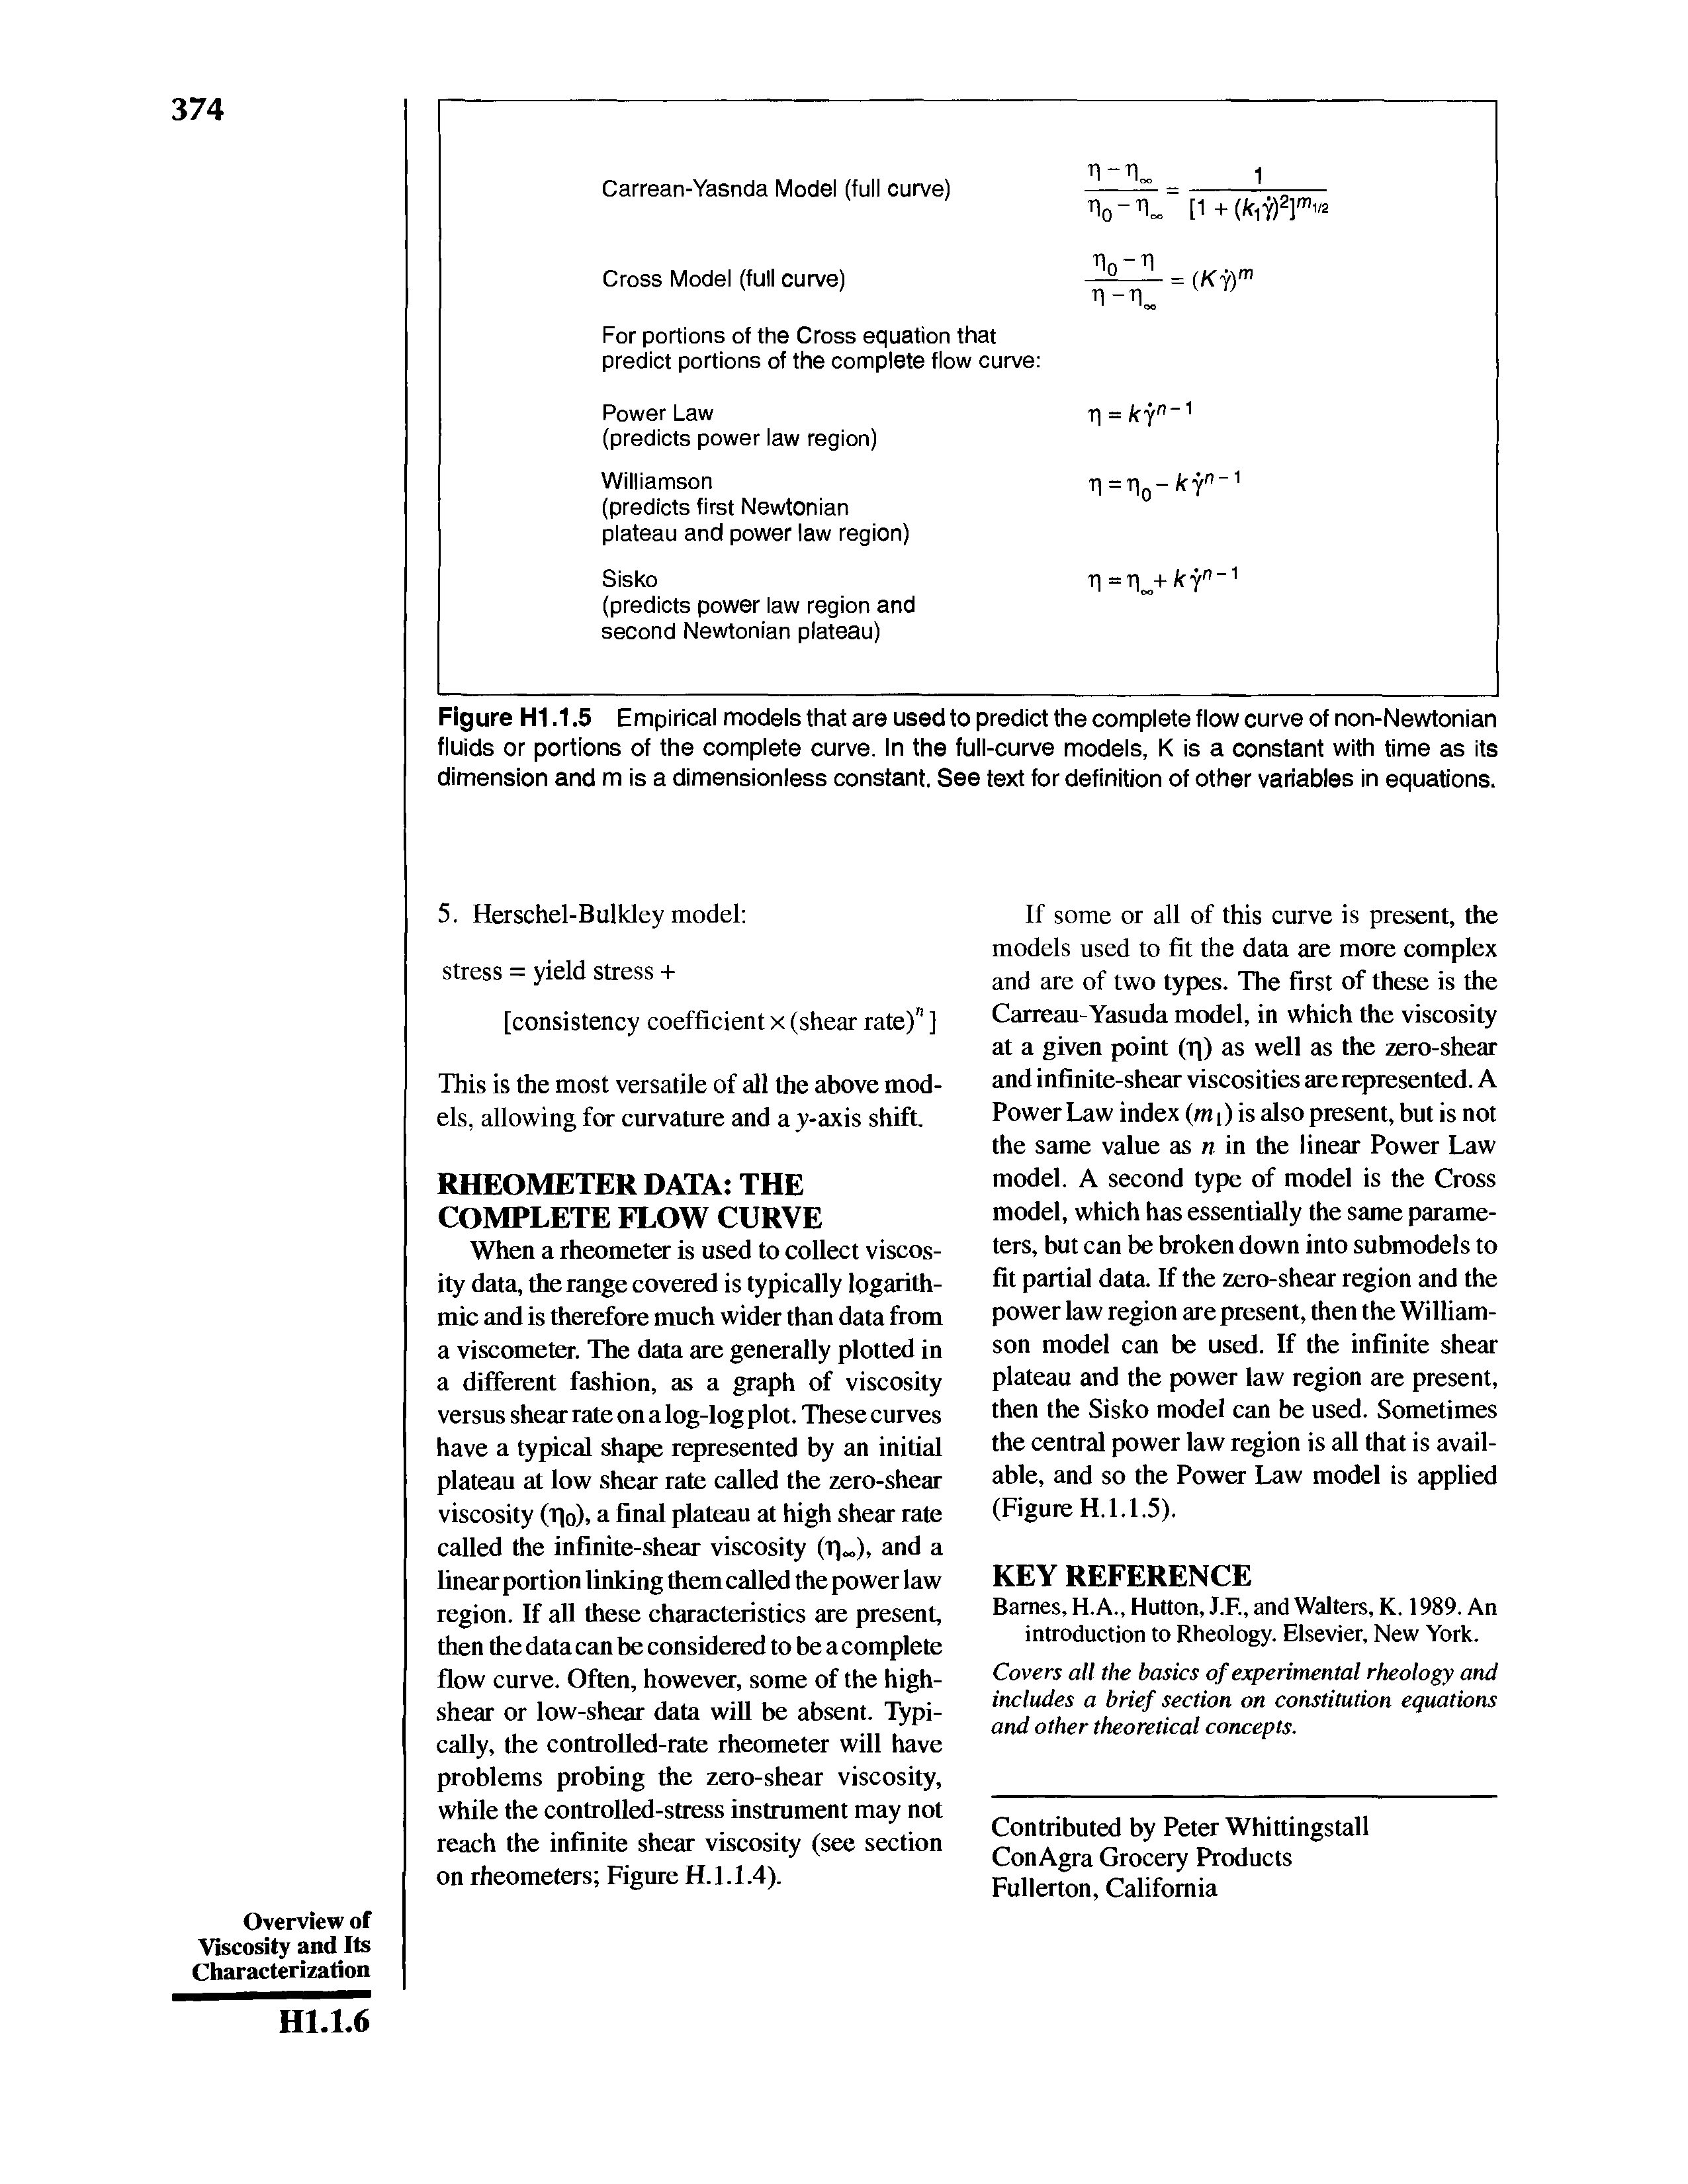 Figure H1.1.5 Empirical models that are used to predict the complete flow curve of non-Newtonian fluids or portions of the complete curve. In the full-curve models, K is a constant with time as its dimension and m is a dimensionless constant. See text for definition of other variables in equations.